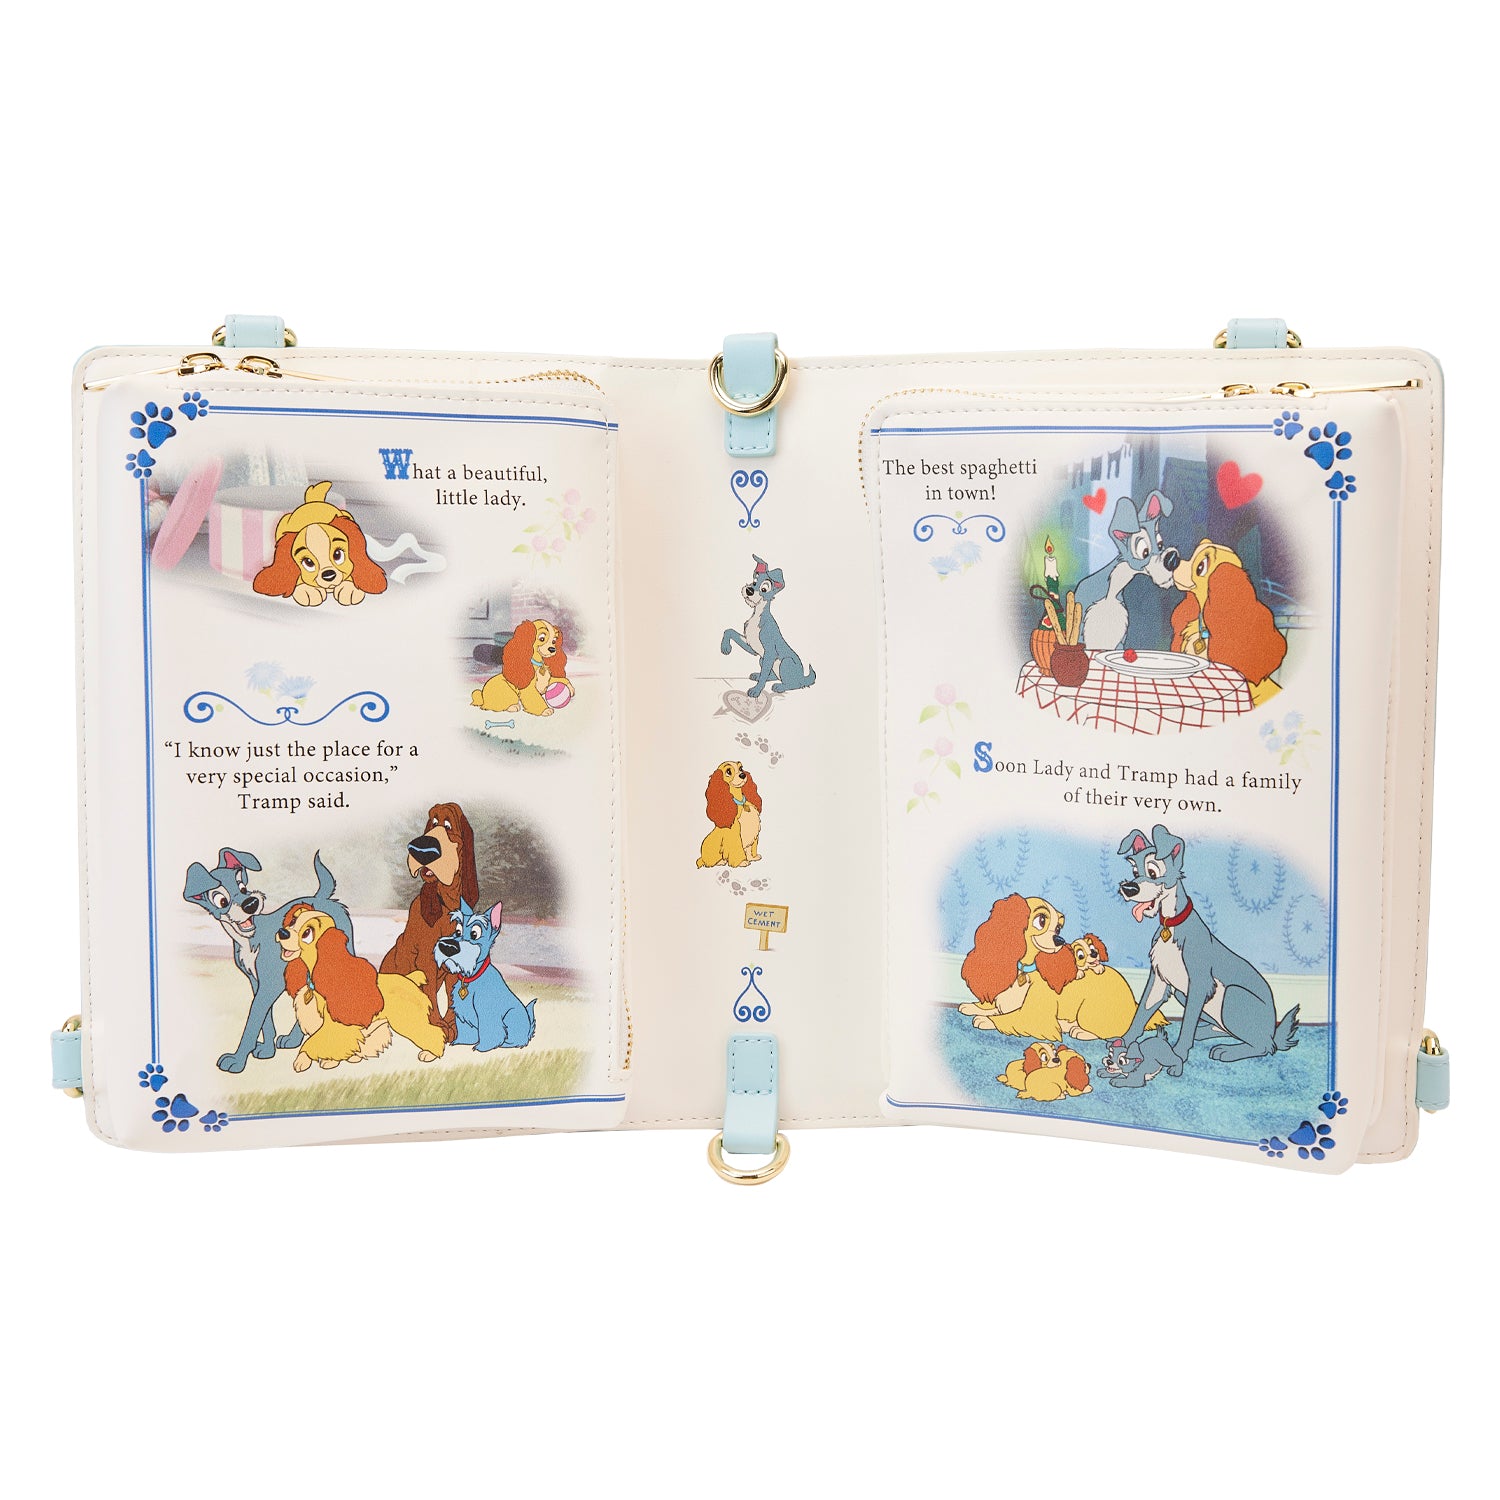 Disney | Lady and The Tramp Classic Books Convertible Backpack/Crossbody